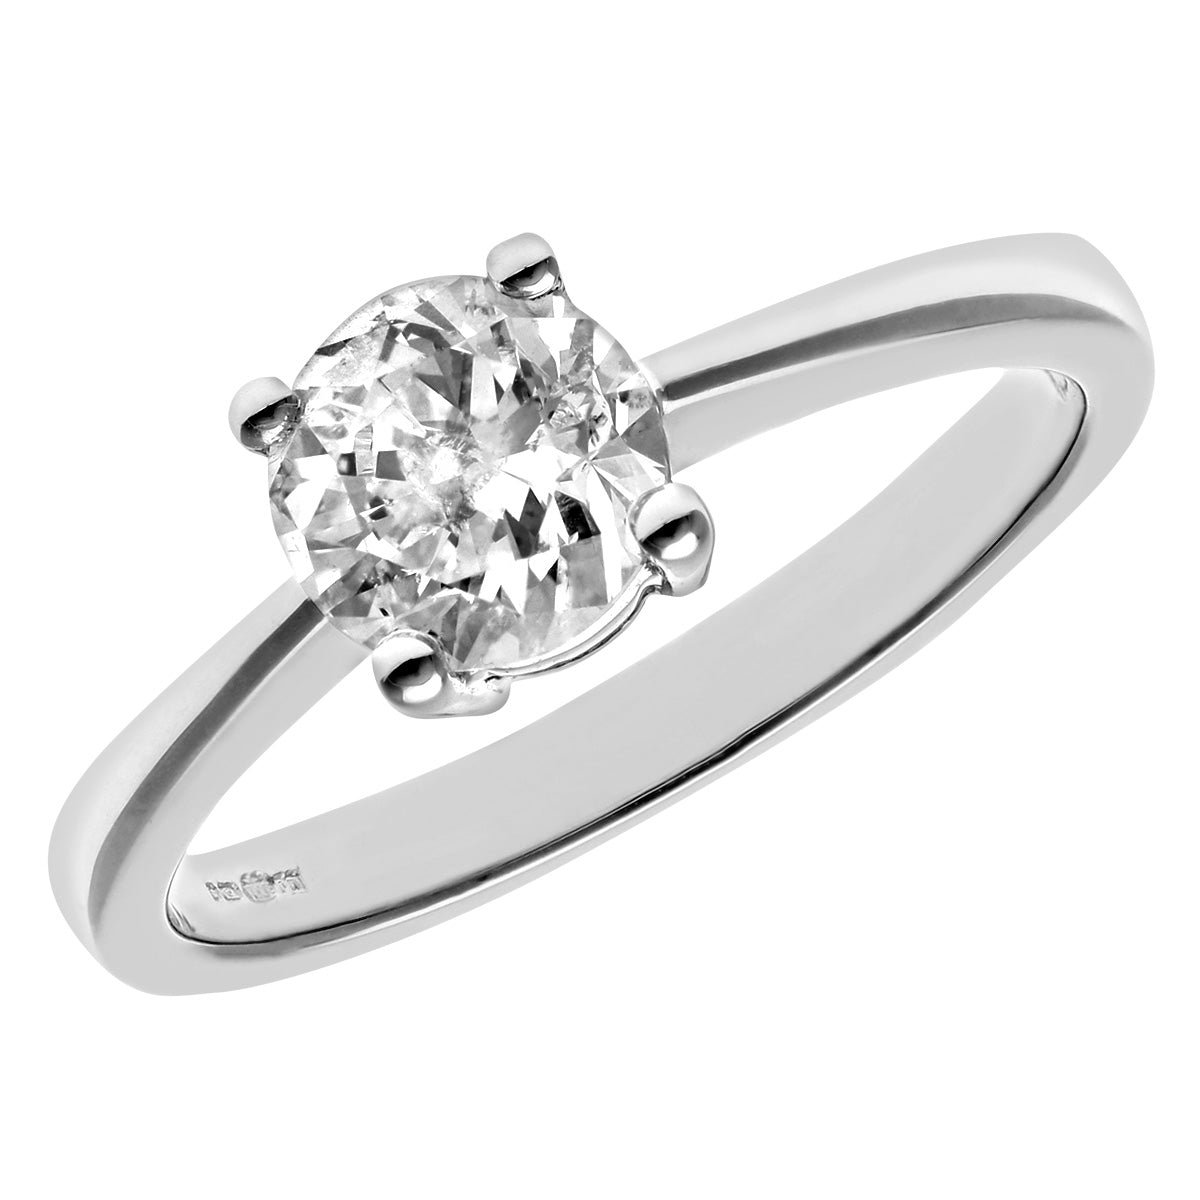 18ct White Gold  1ct Diamond 4 Claw Solitaire Engagement Ring - PR0AXL4690W18HSI